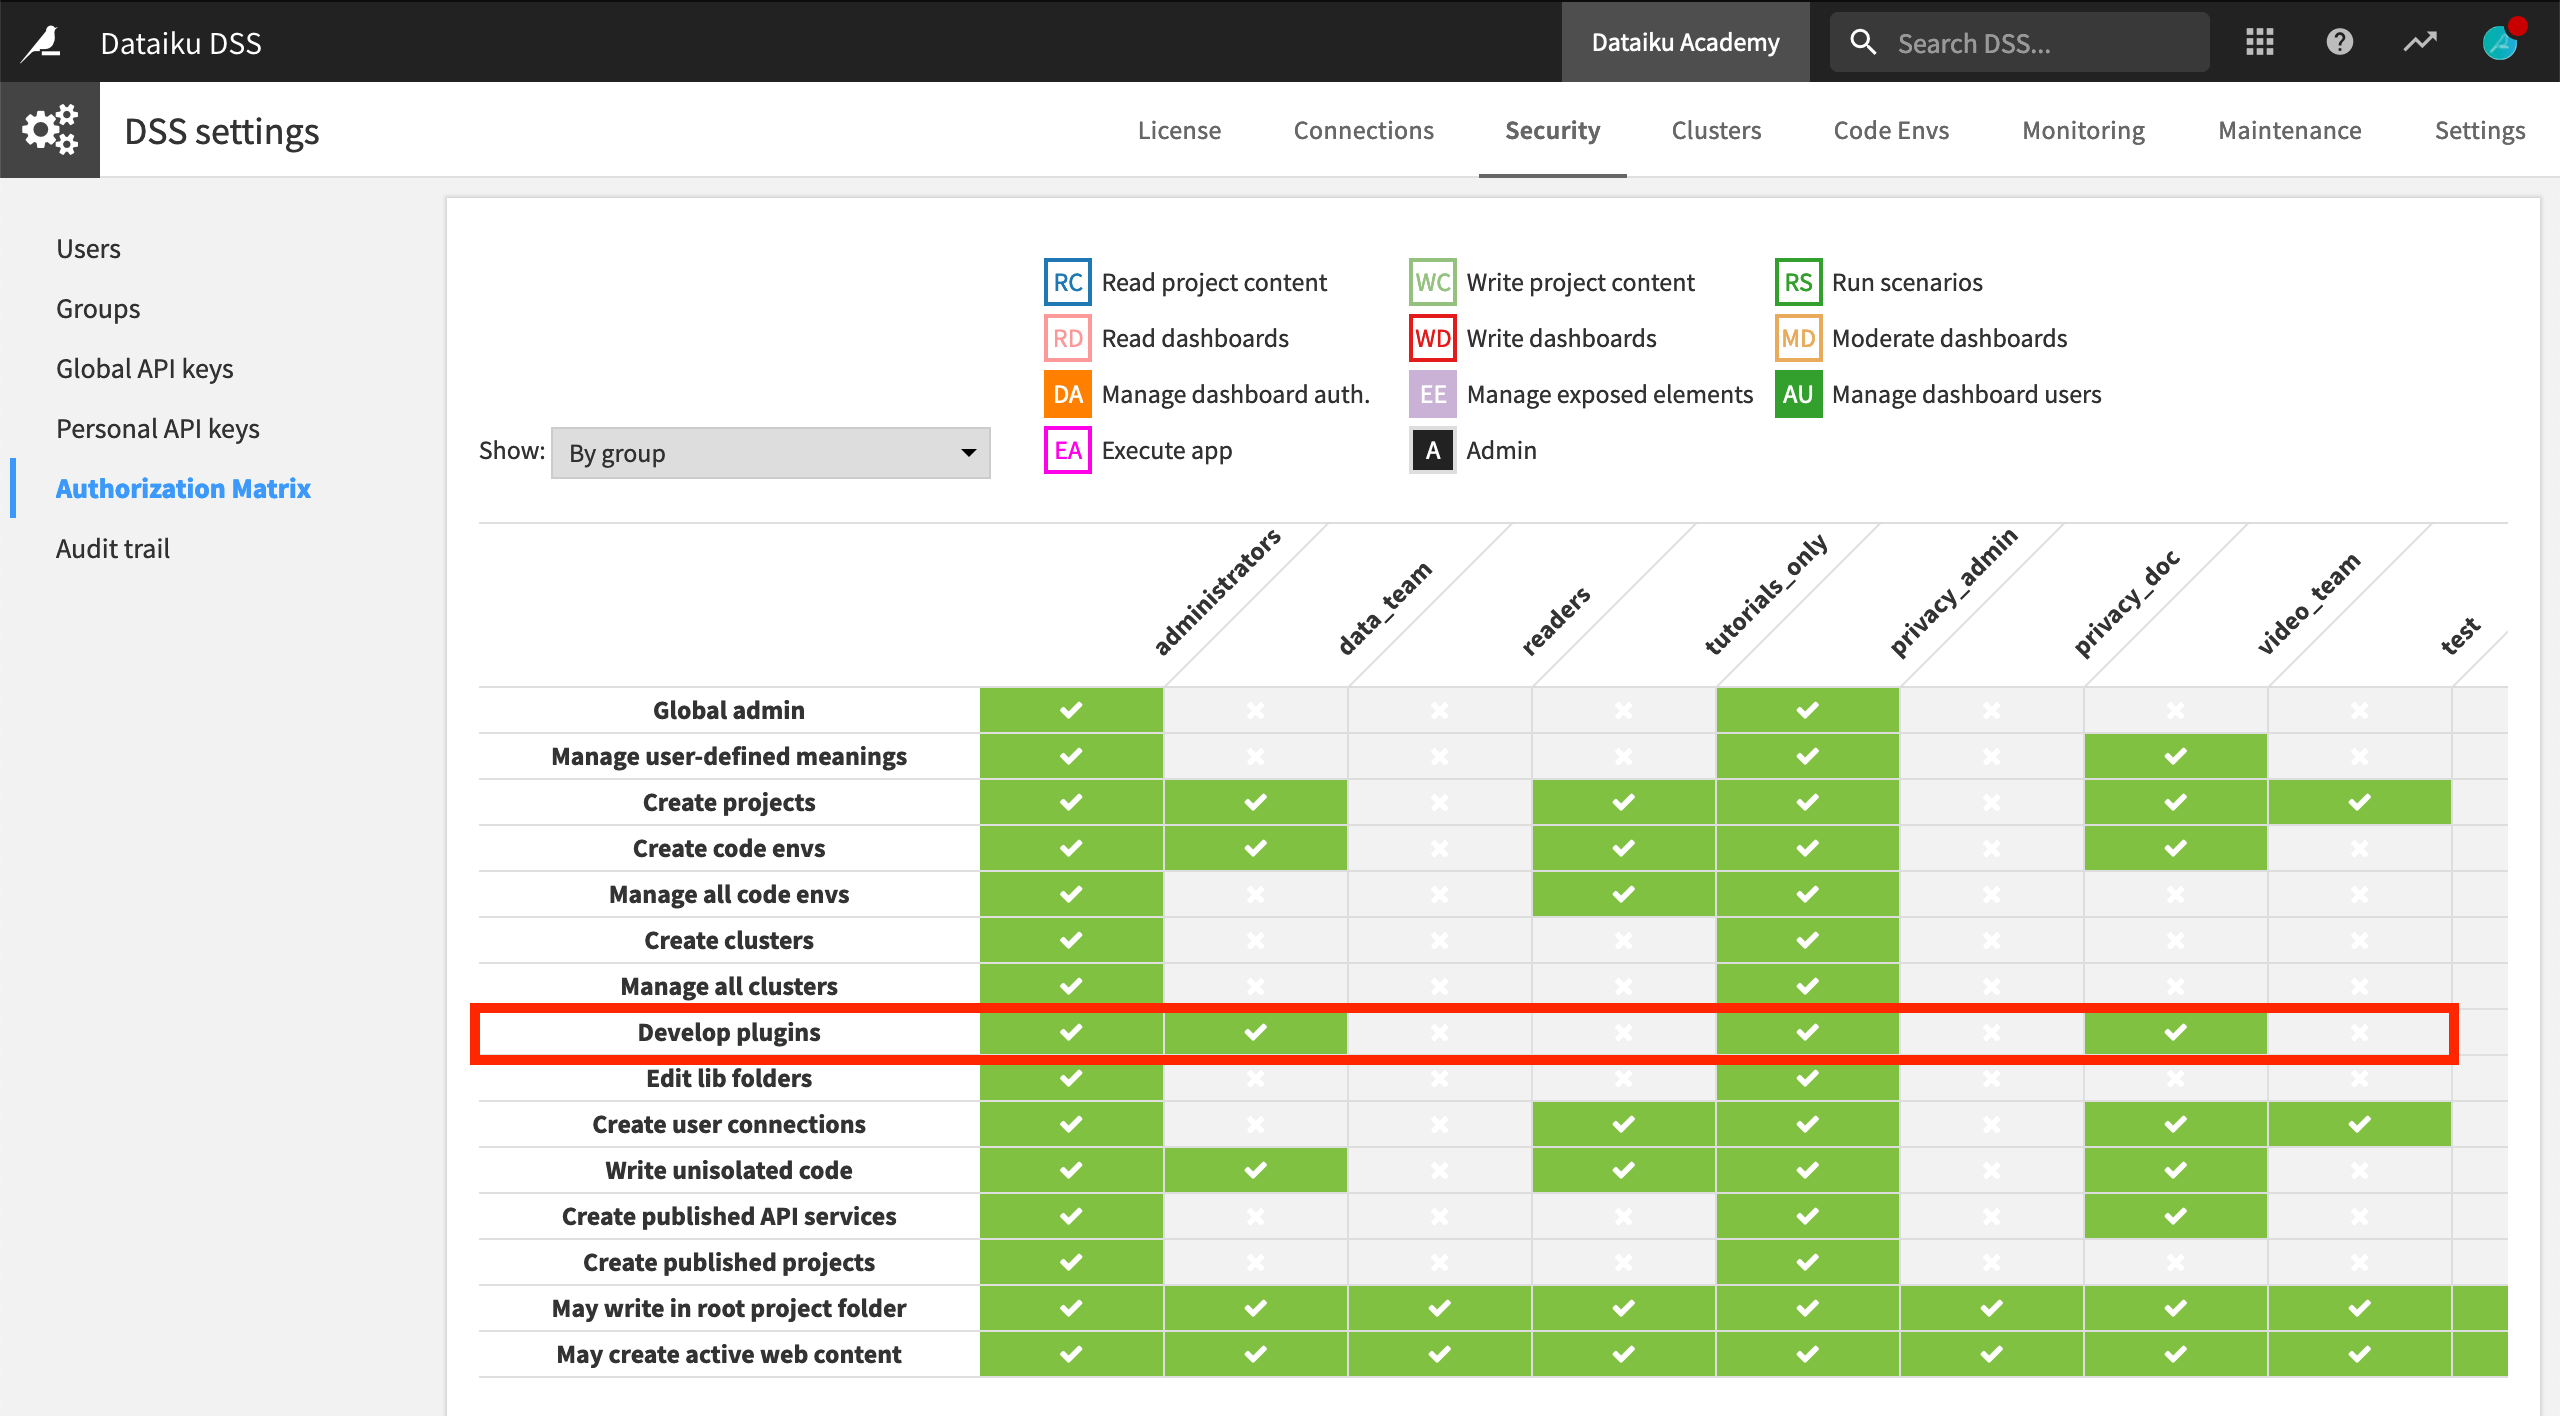 The Dataiku group-wise authorization matrix showing the permissions of every group on the instance, including plugin development